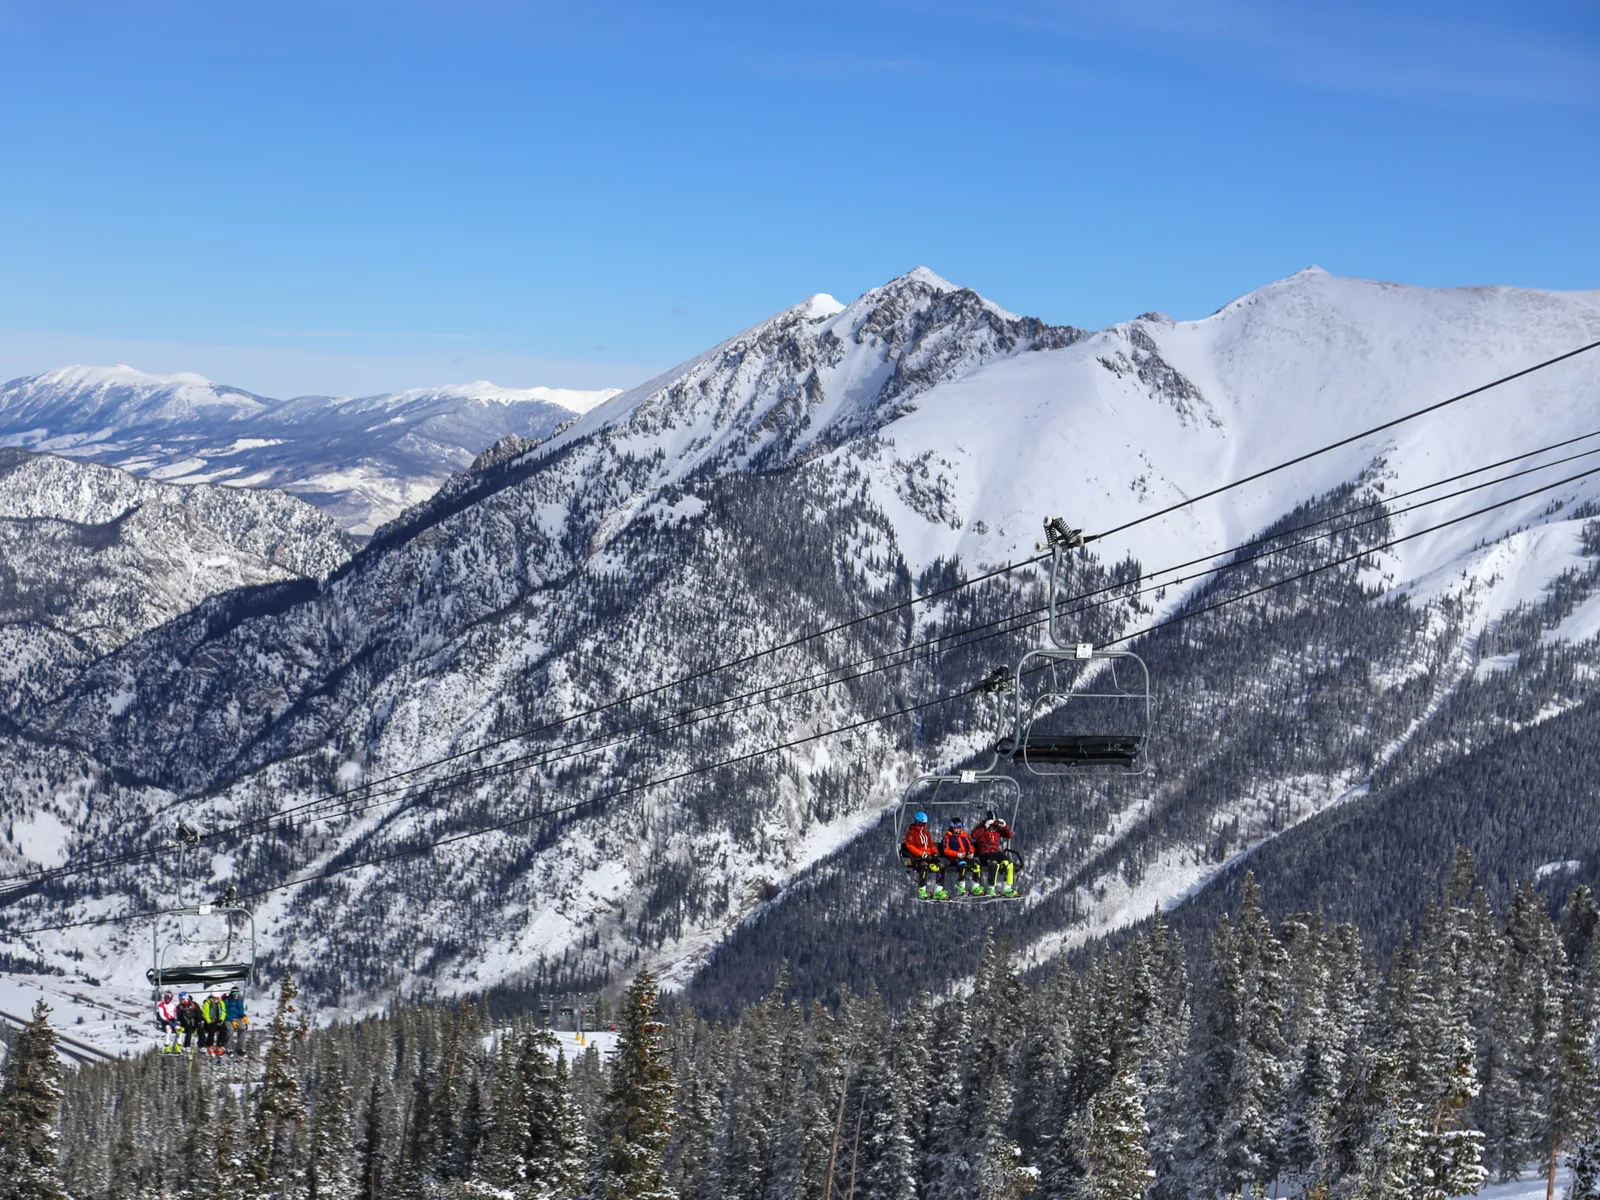 Two groups of skiers riding up a chairlift during a clear winter sky in Copper Mountain Ski Resort, one of the best ski resorts near Denver